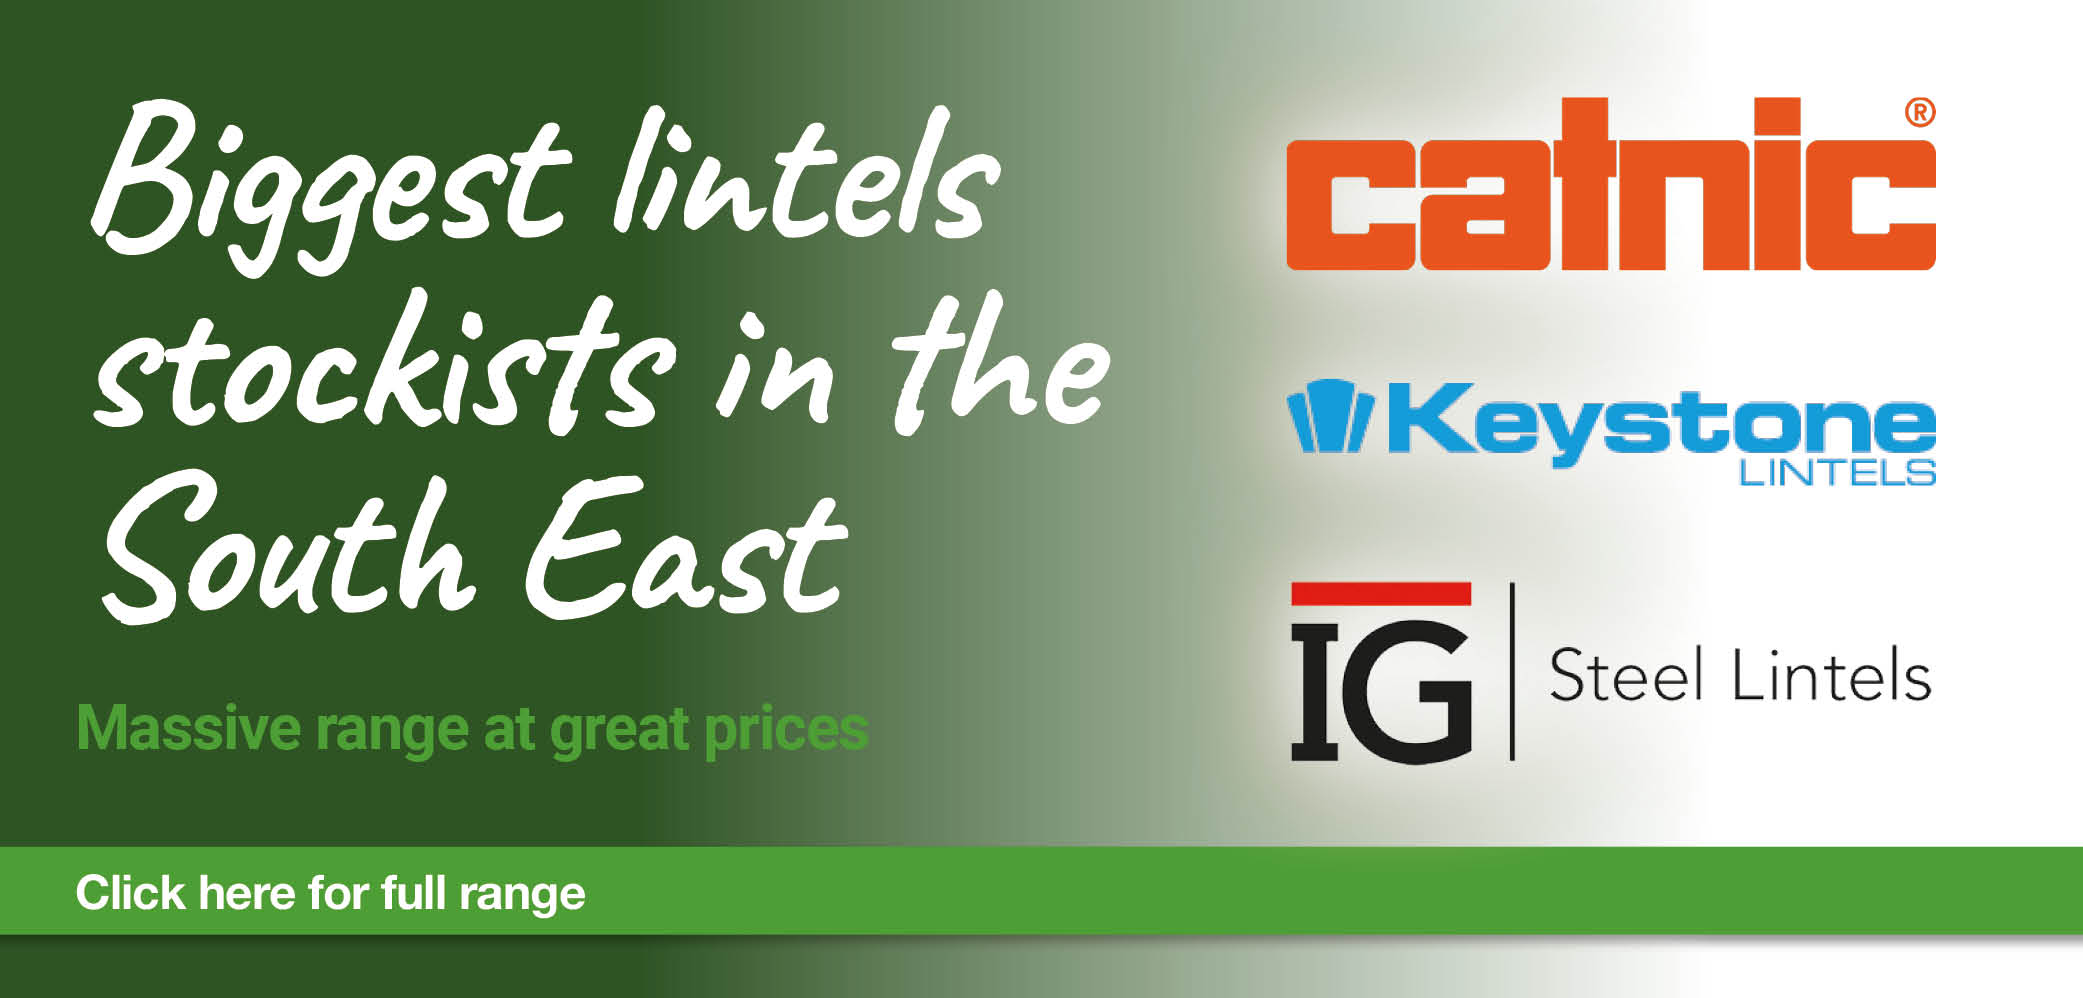 Biggest lintels stocklist in the South East